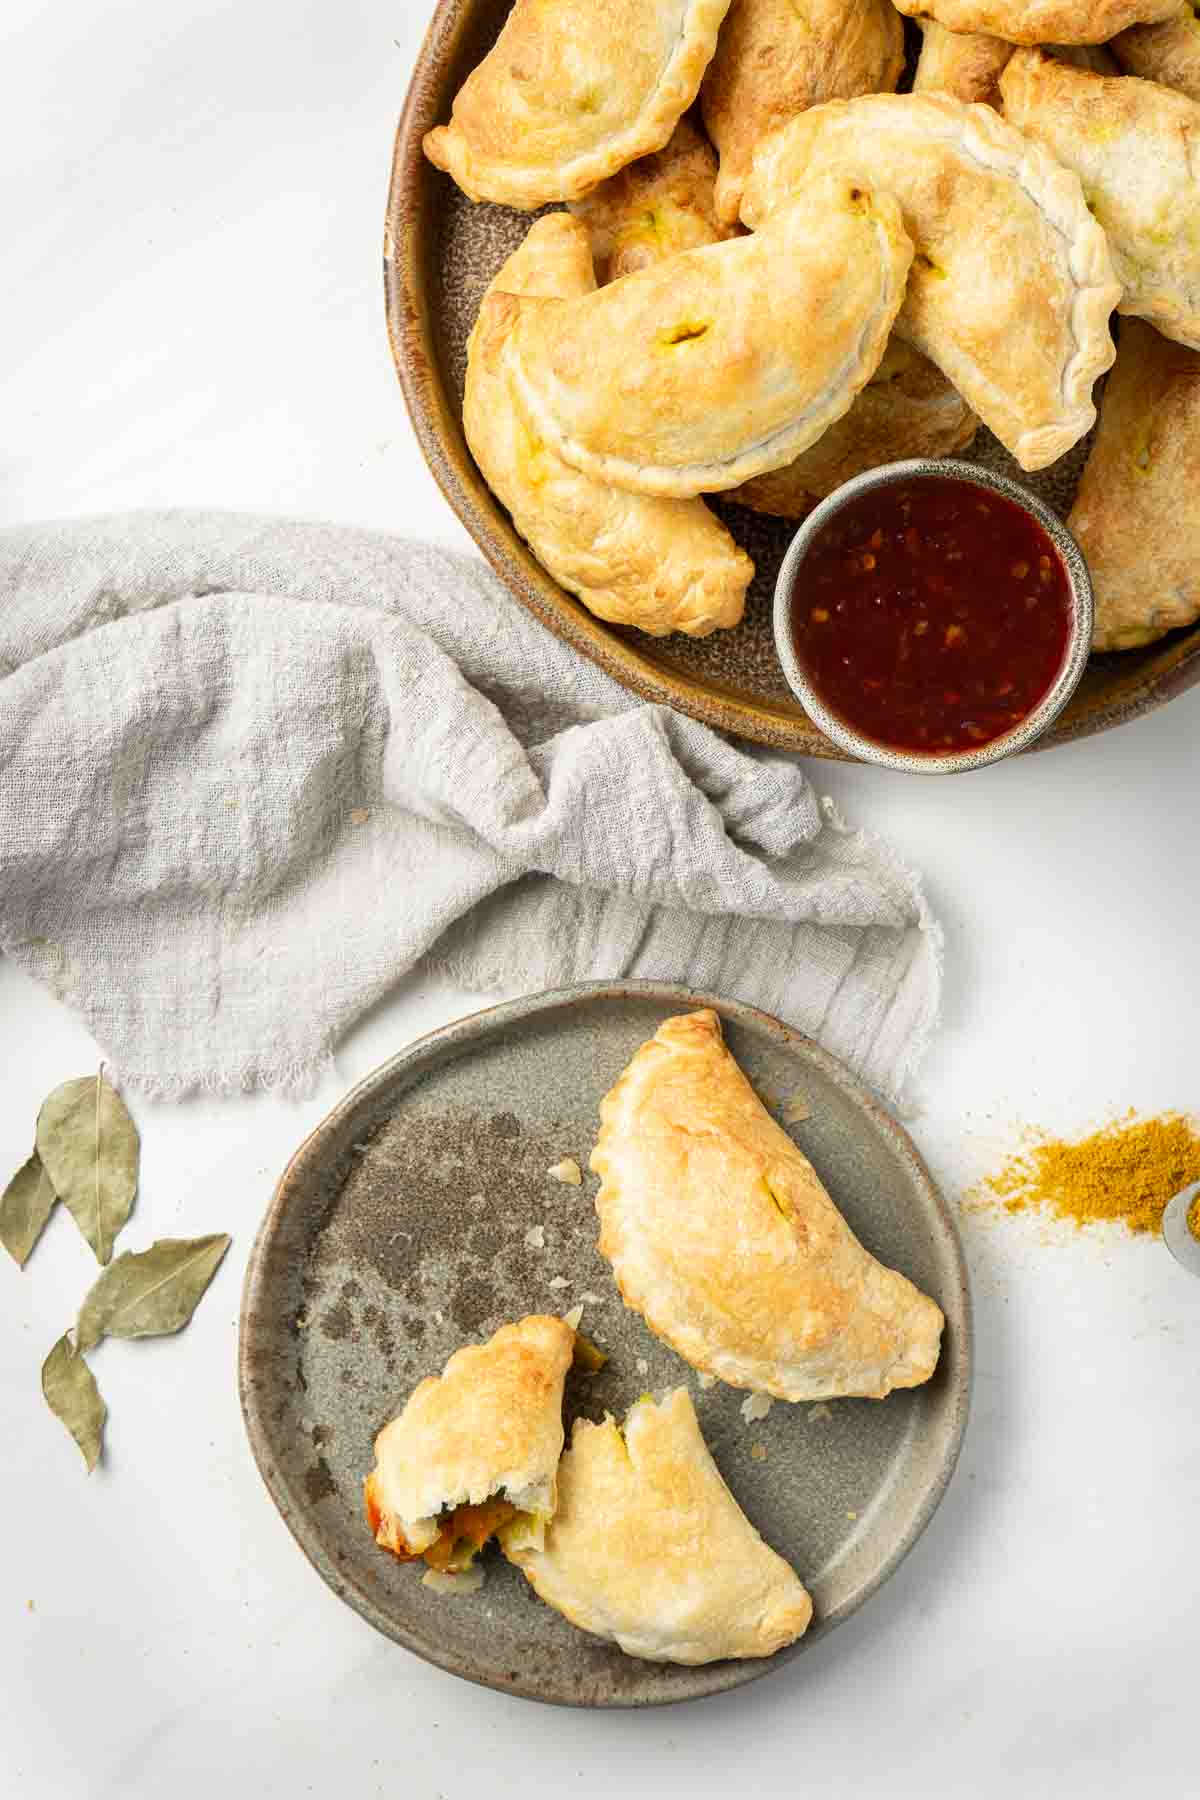 Vegetarian curry puffs being served on plates.